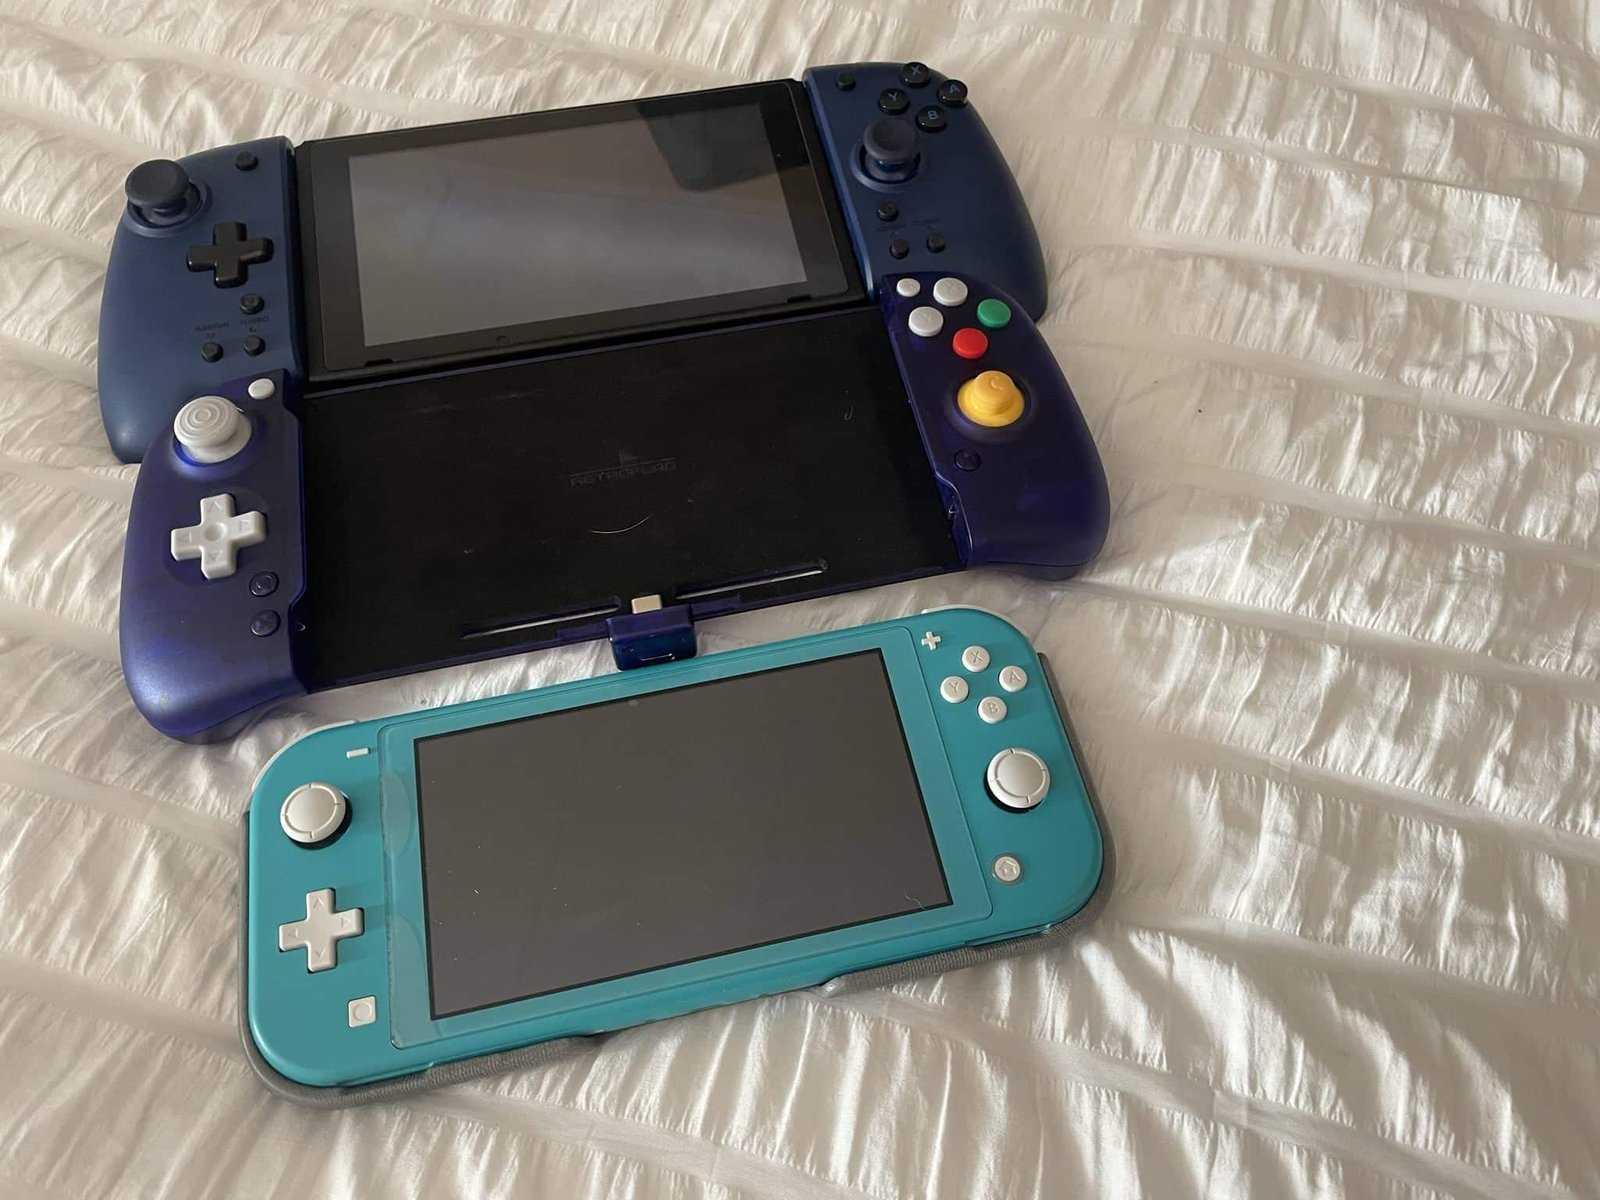 The retroflag is a bit smaller than a switch with hori split pad pro controllers.